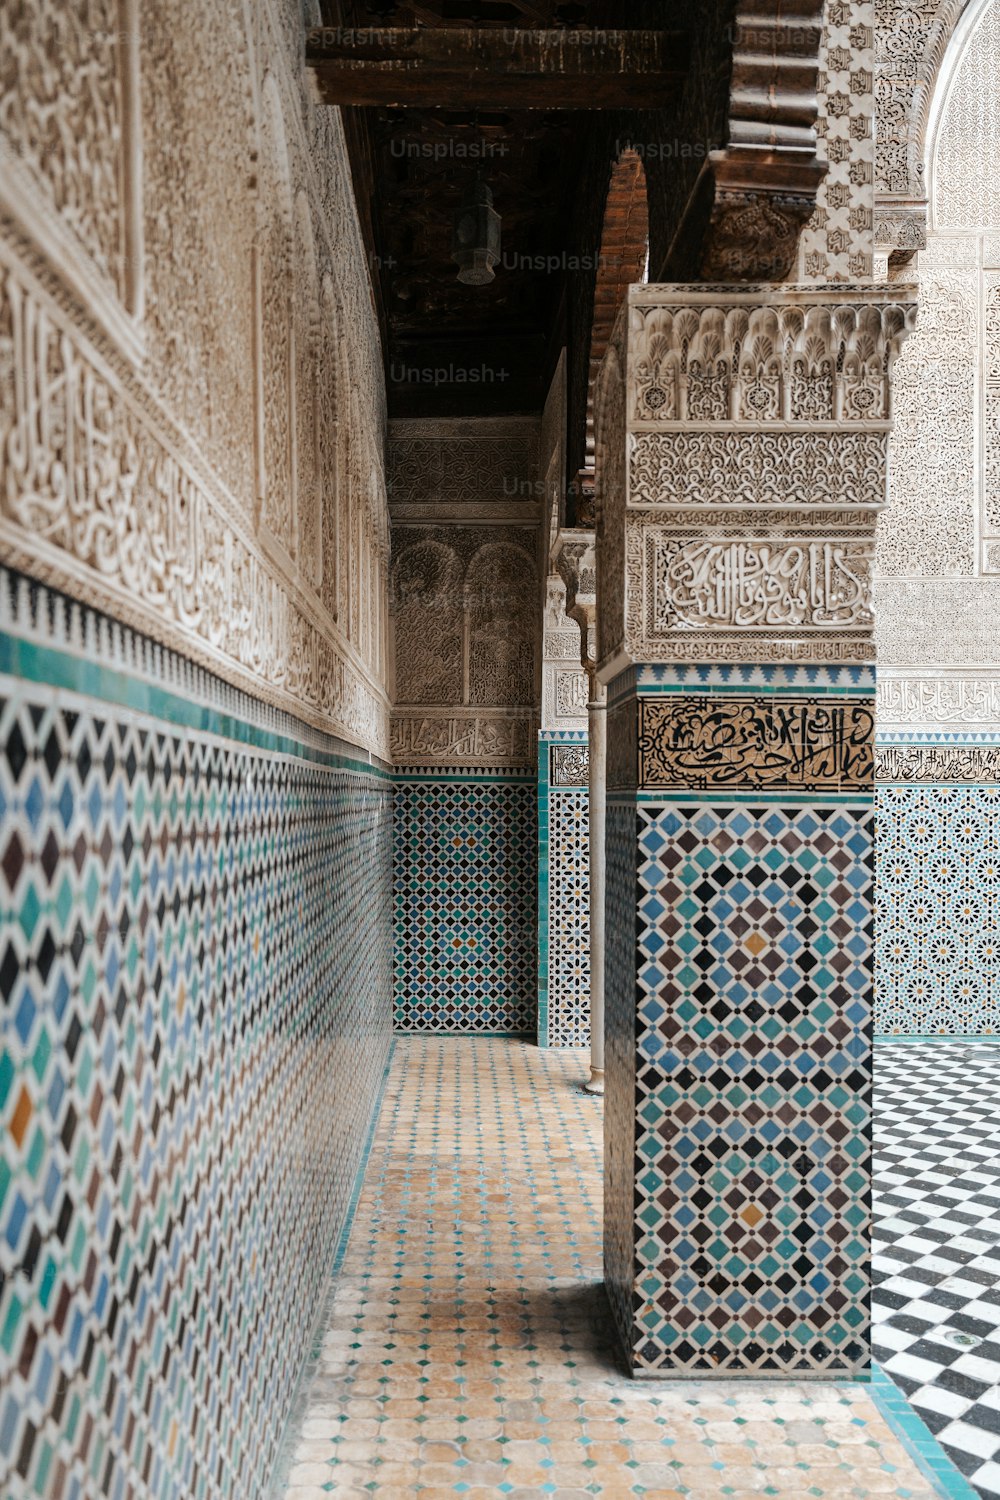 a tiled hallway with blue and white tiles